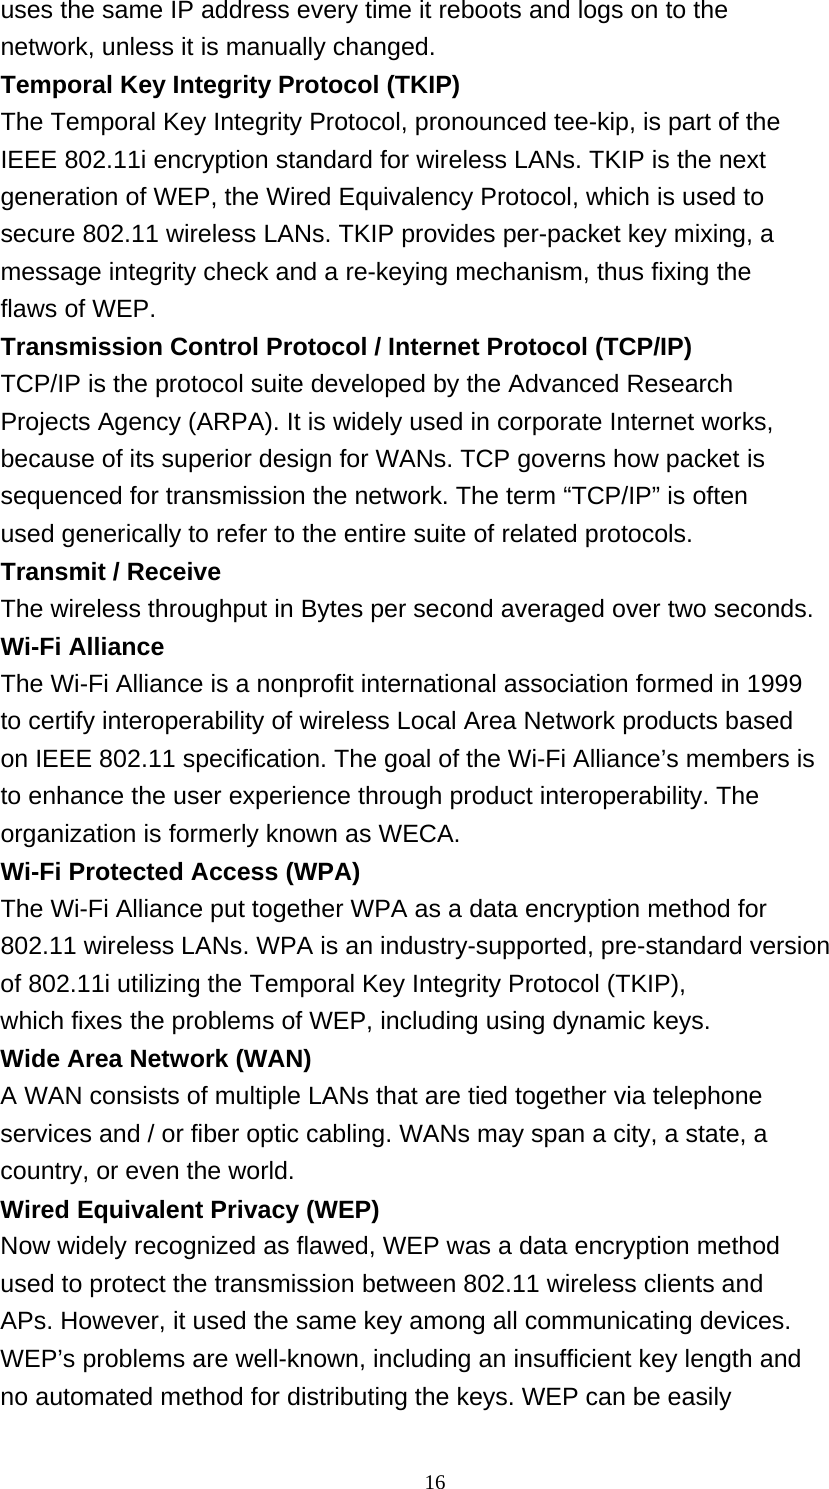 16  uses the same IP address every time it reboots and logs on to the network, unless it is manually changed. Temporal Key Integrity Protocol (TKIP) The Temporal Key Integrity Protocol, pronounced tee-kip, is part of the IEEE 802.11i encryption standard for wireless LANs. TKIP is the next generation of WEP, the Wired Equivalency Protocol, which is used to secure 802.11 wireless LANs. TKIP provides per-packet key mixing, a message integrity check and a re-keying mechanism, thus fixing the flaws of WEP. Transmission Control Protocol / Internet Protocol (TCP/IP) TCP/IP is the protocol suite developed by the Advanced Research Projects Agency (ARPA). It is widely used in corporate Internet works, because of its superior design for WANs. TCP governs how packet is sequenced for transmission the network. The term “TCP/IP” is often used generically to refer to the entire suite of related protocols. Transmit / Receive The wireless throughput in Bytes per second averaged over two seconds. Wi-Fi Alliance The Wi-Fi Alliance is a nonprofit international association formed in 1999 to certify interoperability of wireless Local Area Network products based on IEEE 802.11 specification. The goal of the Wi-Fi Alliance’s members is to enhance the user experience through product interoperability. The organization is formerly known as WECA. Wi-Fi Protected Access (WPA) The Wi-Fi Alliance put together WPA as a data encryption method for 802.11 wireless LANs. WPA is an industry-supported, pre-standard version of 802.11i utilizing the Temporal Key Integrity Protocol (TKIP), which fixes the problems of WEP, including using dynamic keys. Wide Area Network (WAN) A WAN consists of multiple LANs that are tied together via telephone services and / or fiber optic cabling. WANs may span a city, a state, a country, or even the world. Wired Equivalent Privacy (WEP) Now widely recognized as flawed, WEP was a data encryption method used to protect the transmission between 802.11 wireless clients and APs. However, it used the same key among all communicating devices. WEP’s problems are well-known, including an insufficient key length and no automated method for distributing the keys. WEP can be easily 